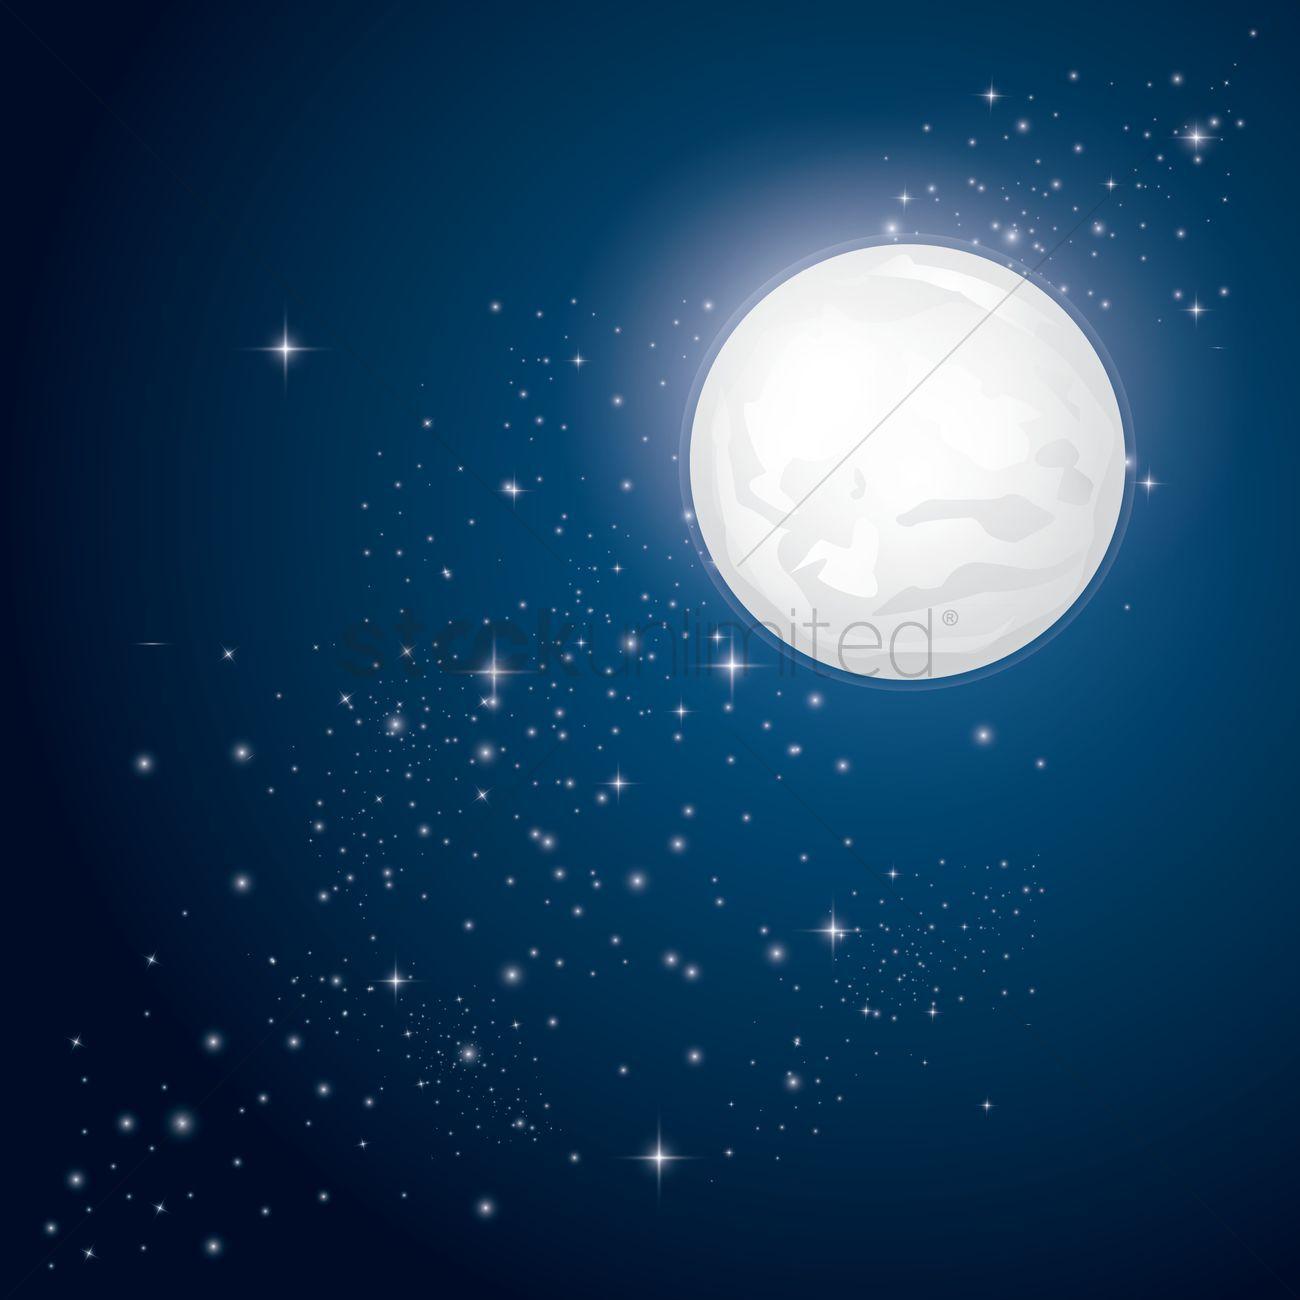 Full moon and stars background Vector Image